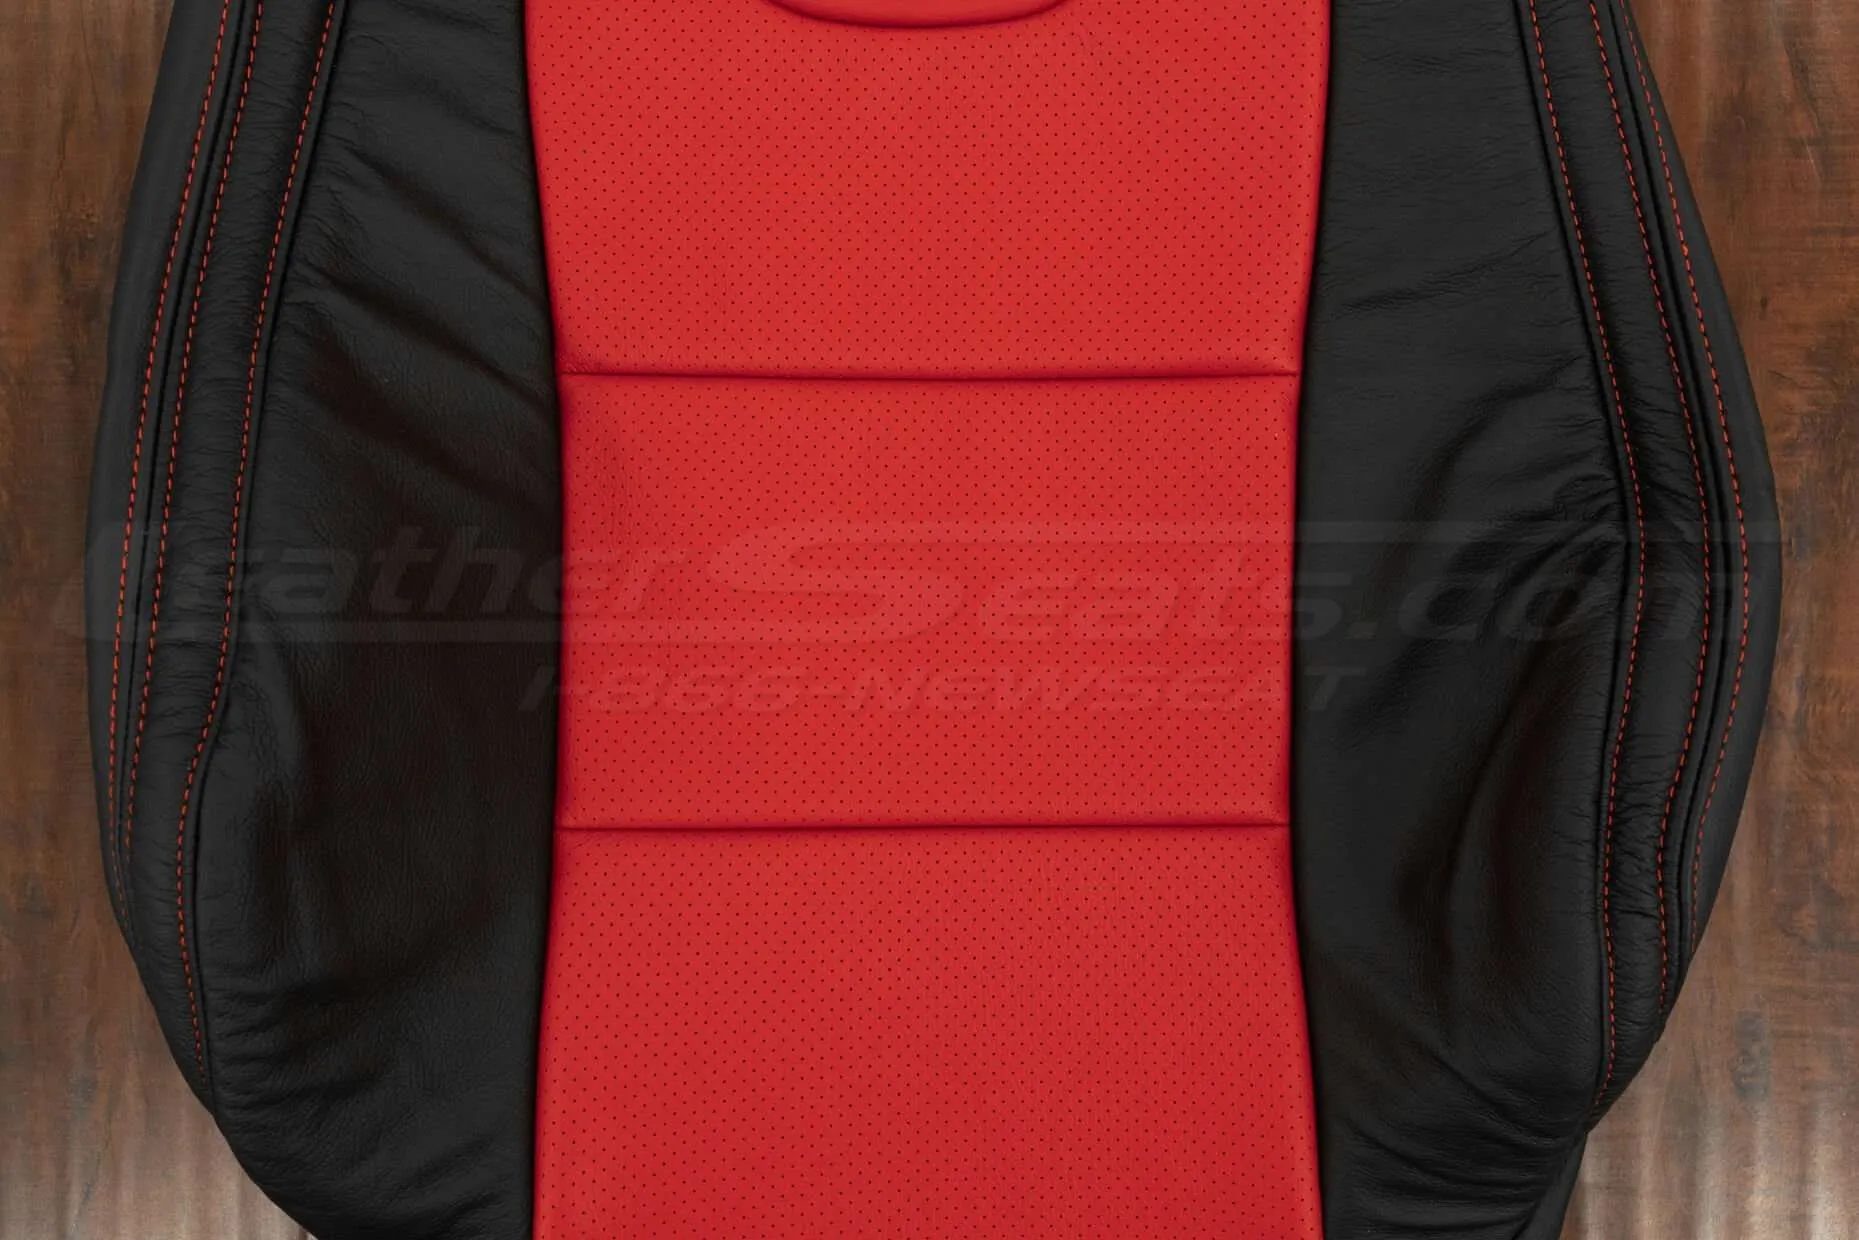 Chevrolet Camaro Leather Kit - Black & Bright Red Backrest inserts and perforation